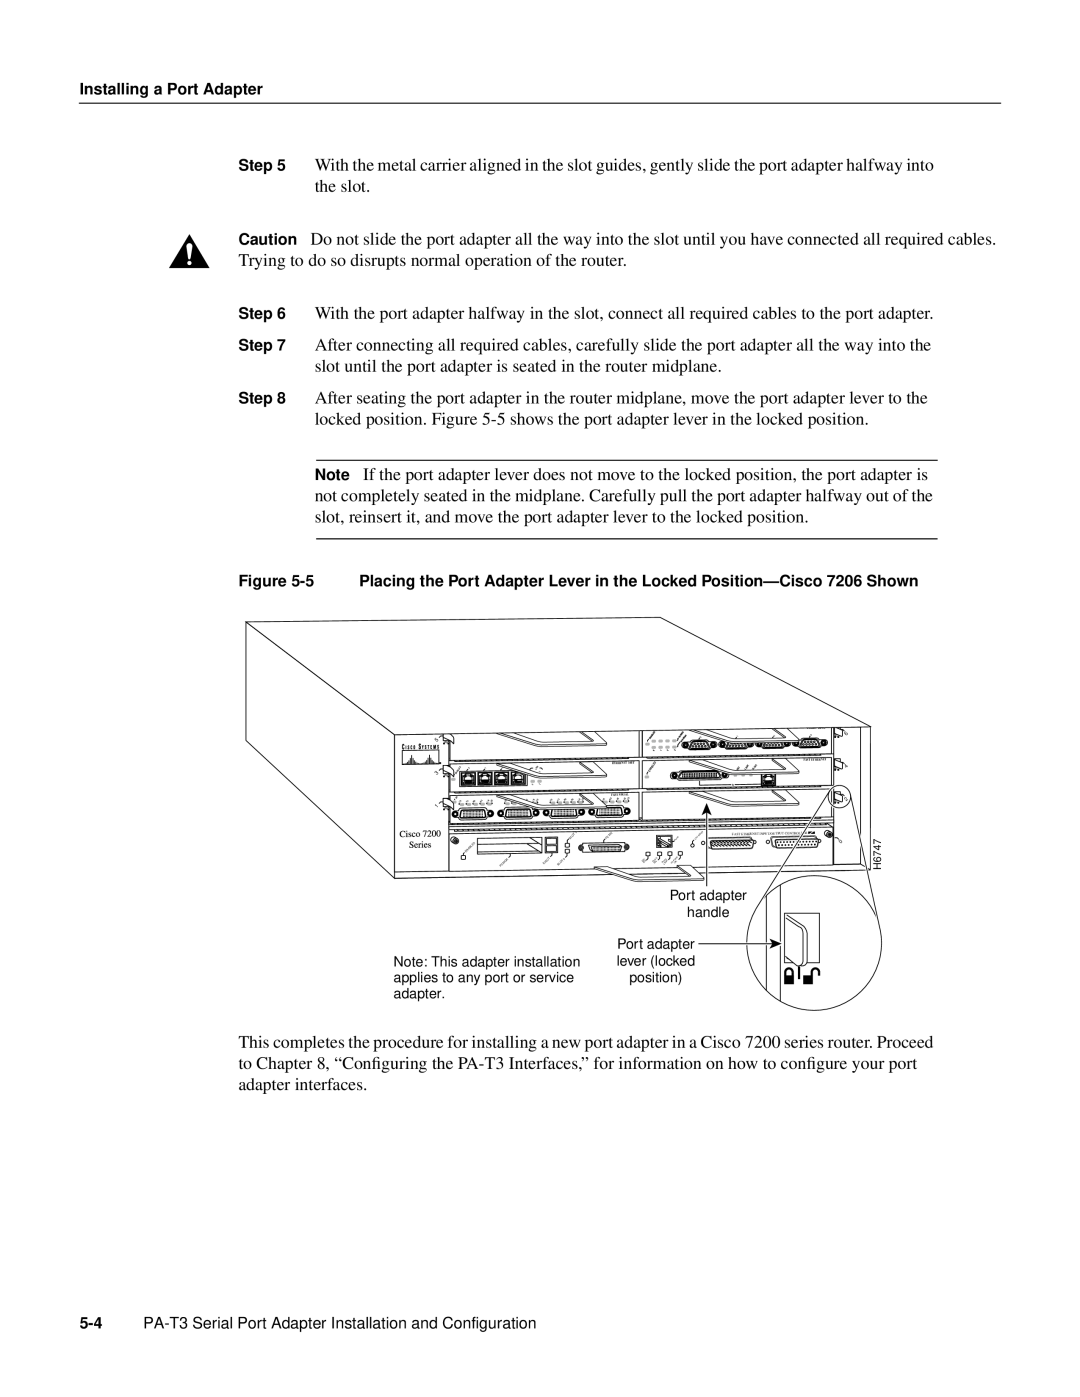 Cisco Systems manual PA-T3 Serial Port Adapter Installation and Configuration, Port adapter lever locked position 